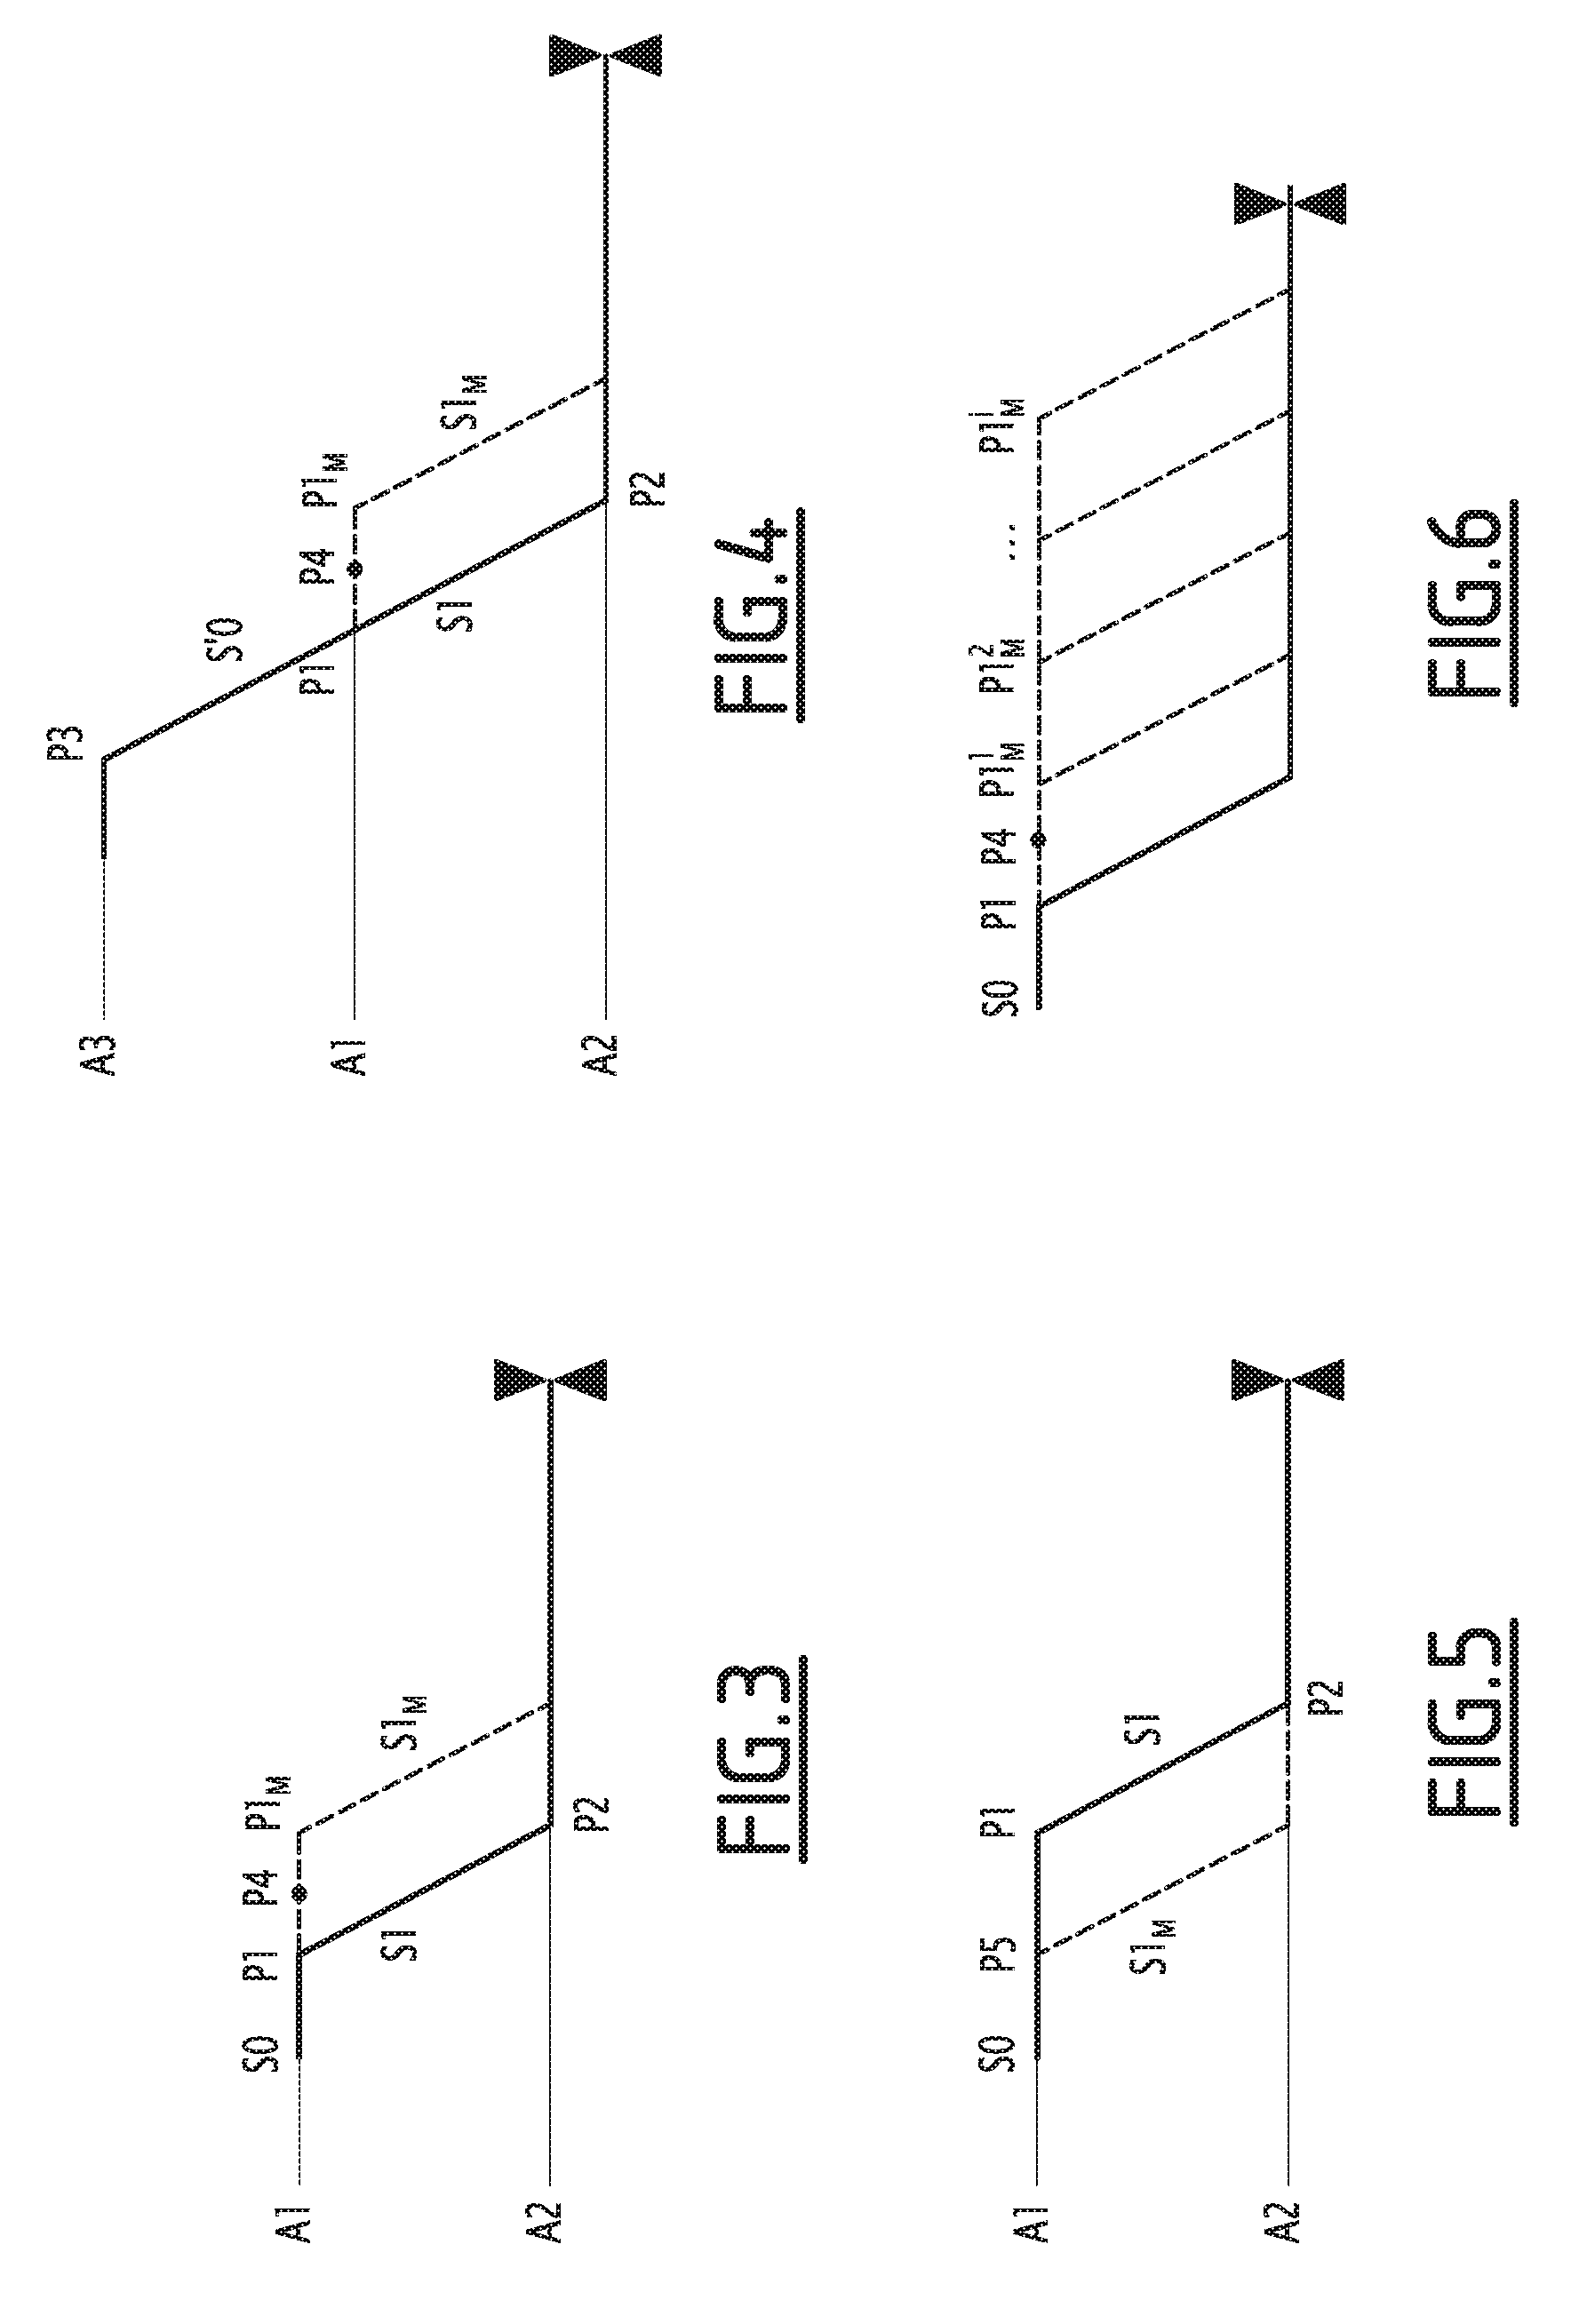 Method and system for determining a vertical trajectory of an aircraft